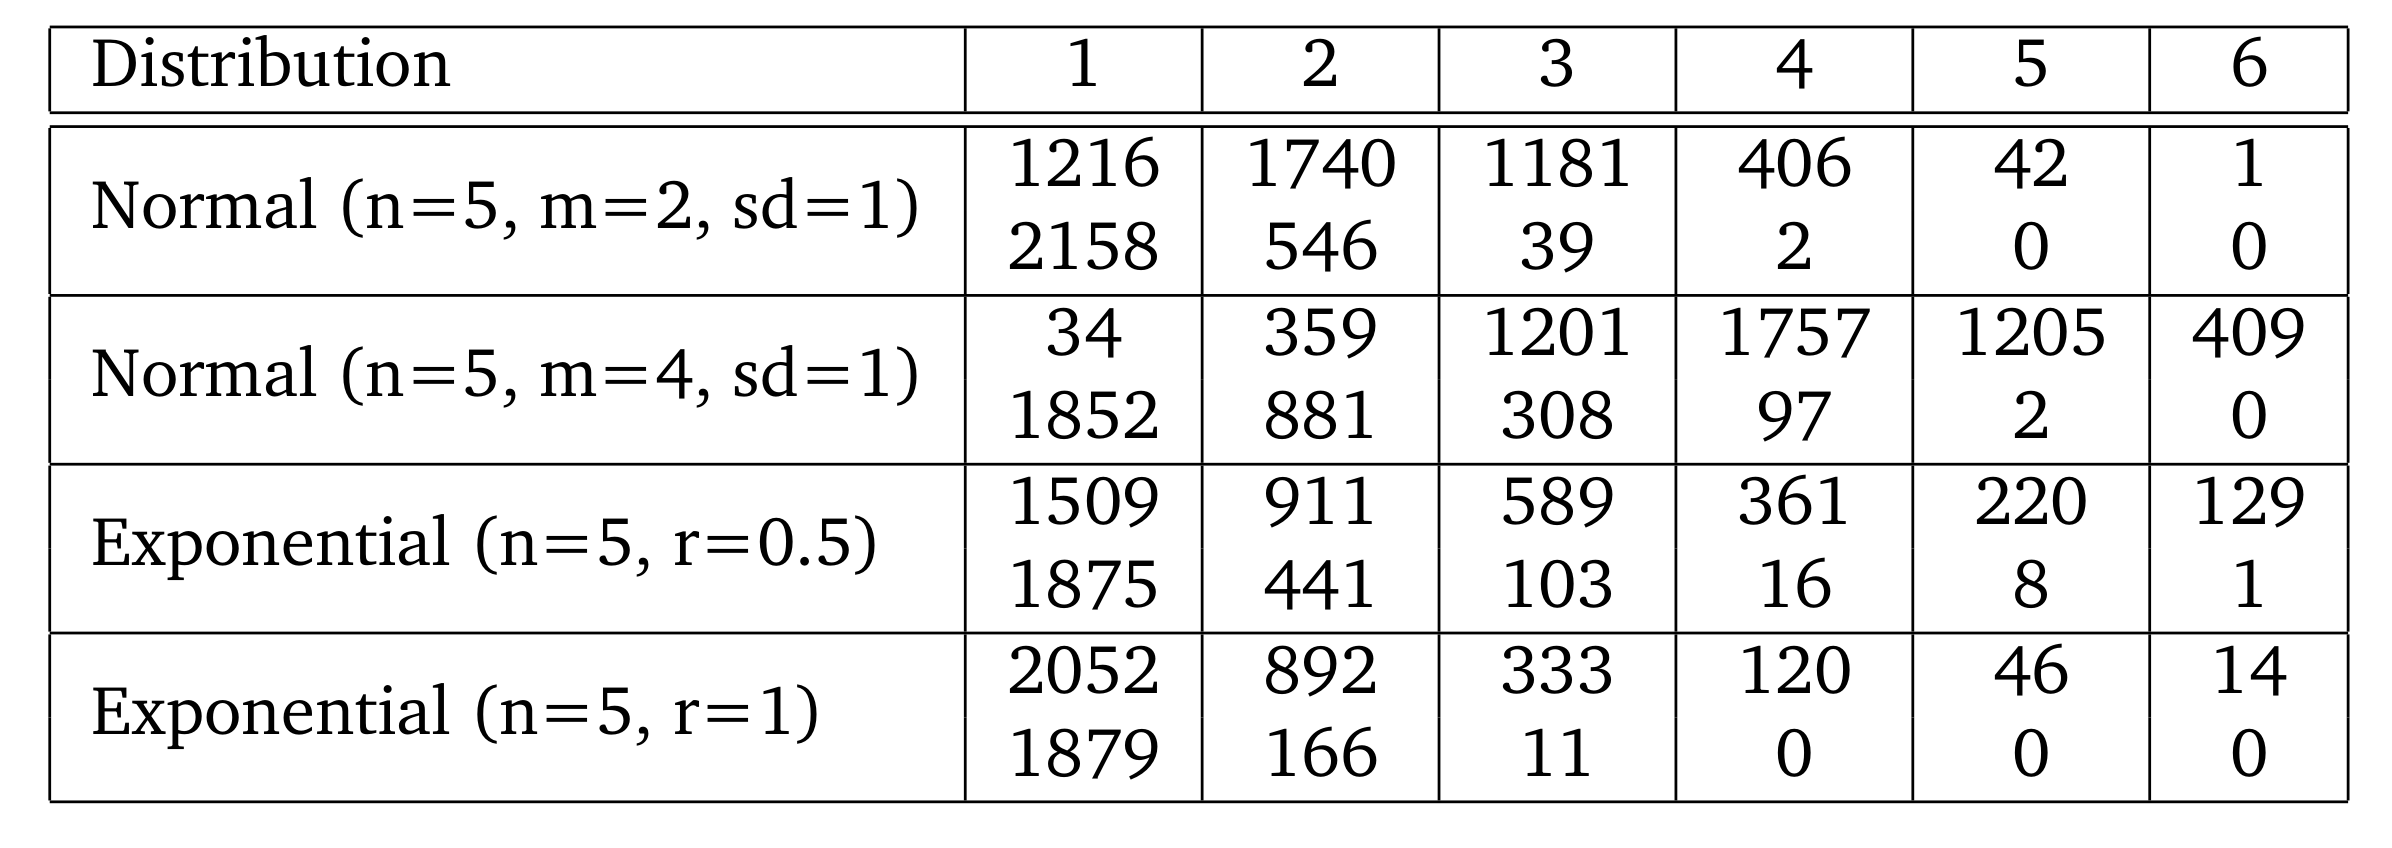 Table3: Furcations (1-6) before and after loss, Loss A